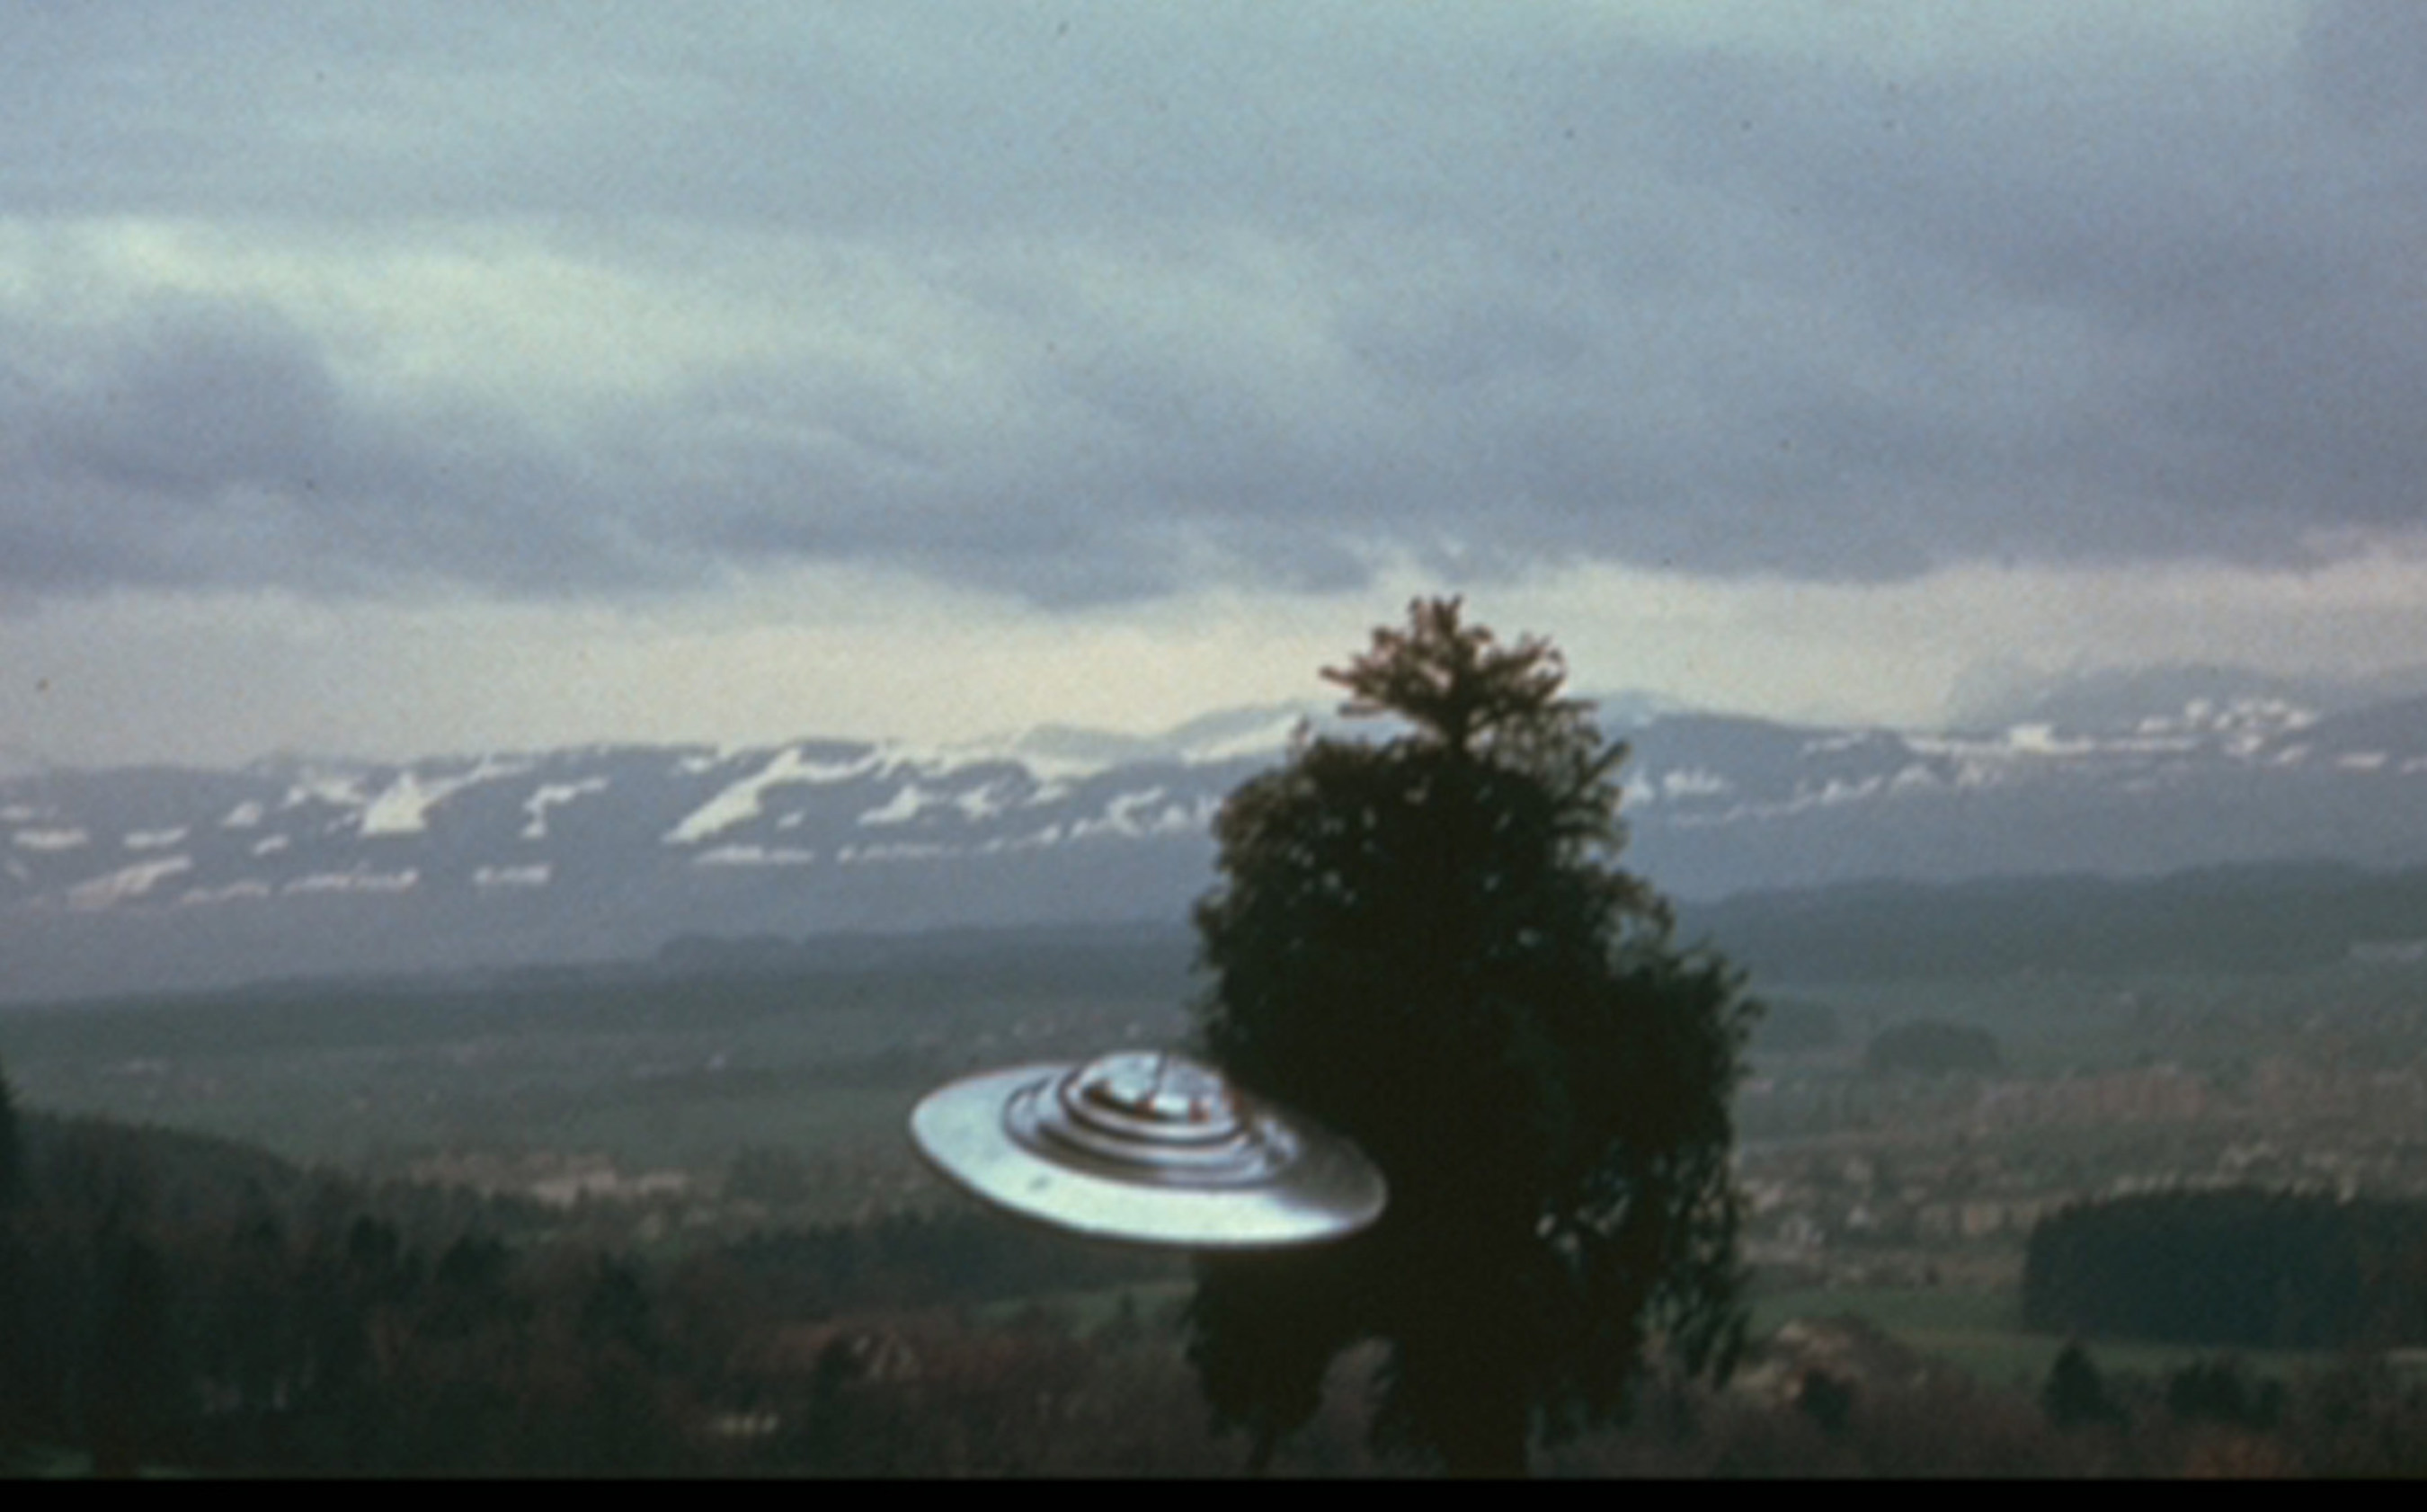 UFO photo by Billy Meier, July 9, 1975, Switzerland. One of nine showing UFO circling the tree. Meier took 1,200 clear, daytime photos on 35 mm film, pre-computer, pre-digital era. Independent, expert analysis showed no models, miniatures or special effects, with real, full-sized tree. Meier took eight films, a video,  sound recordings and presented metal samples for analysis. All of his evidence remains irreproducible. His contacts with the Plejaren extraterrestrials began in 1942...and continue today. Purpose is to help us assure our own future survival. His prophetic information warned of WTC attack, terrorism, wars, Ebola and AIDS epidemics, etc.